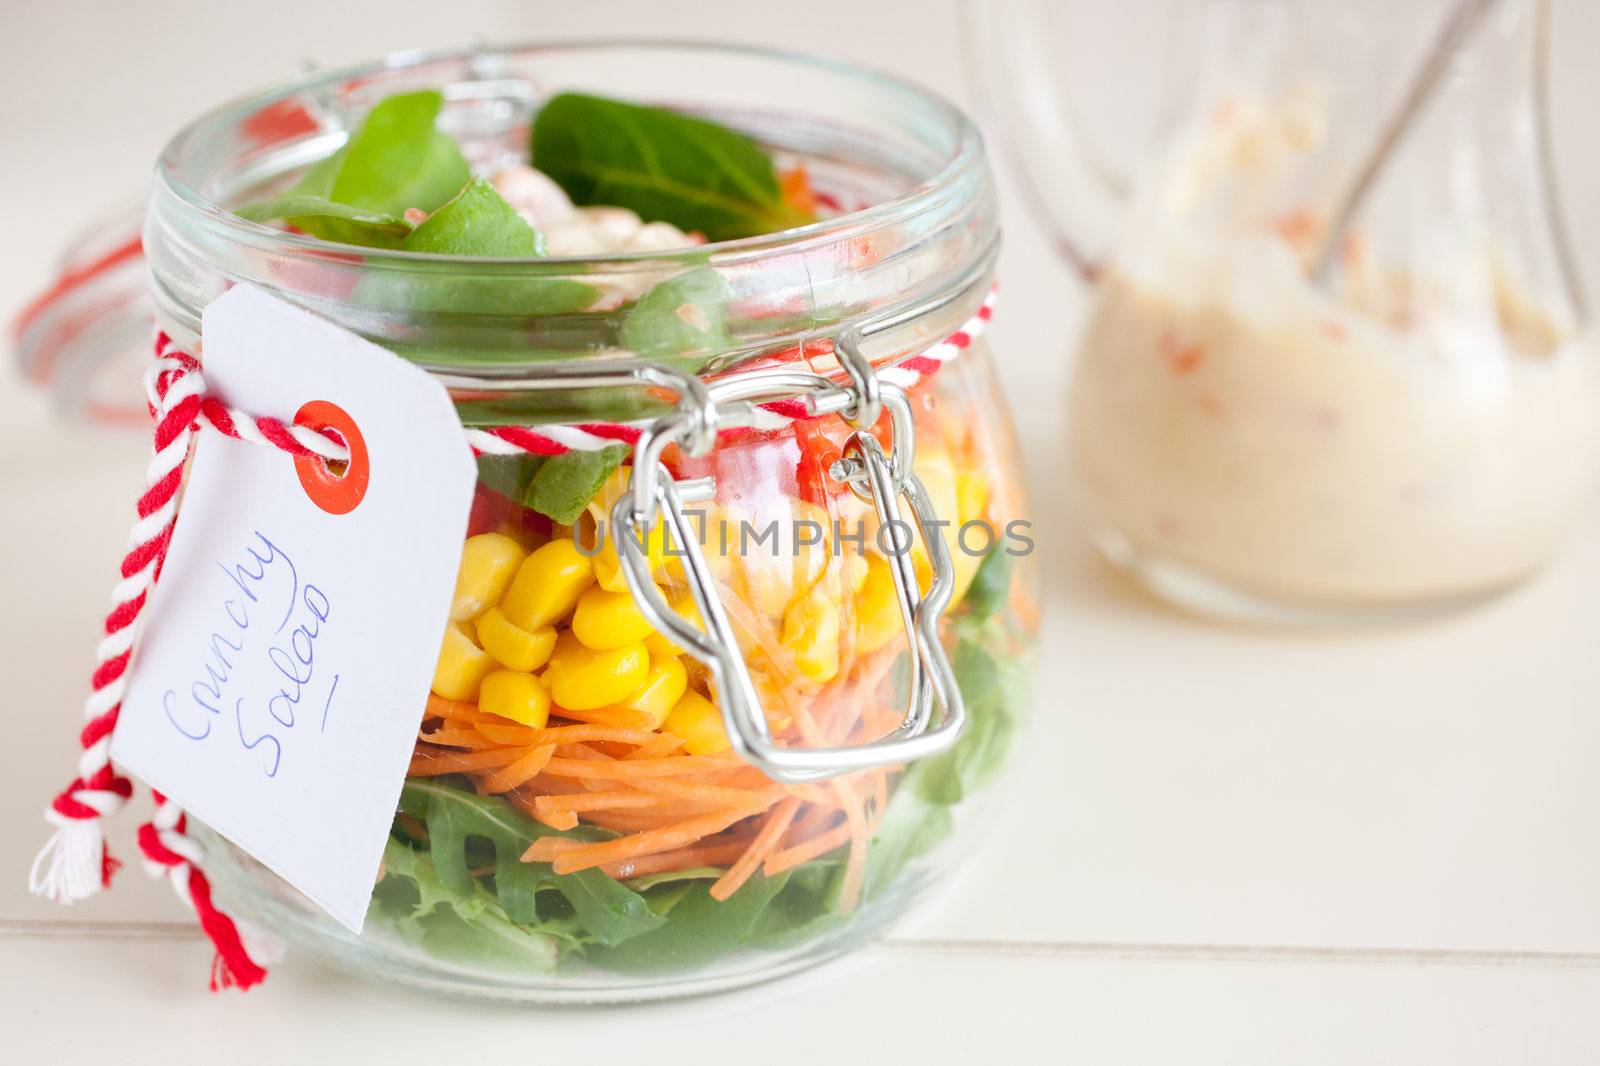 Delicious salad put into a jar for easy transport